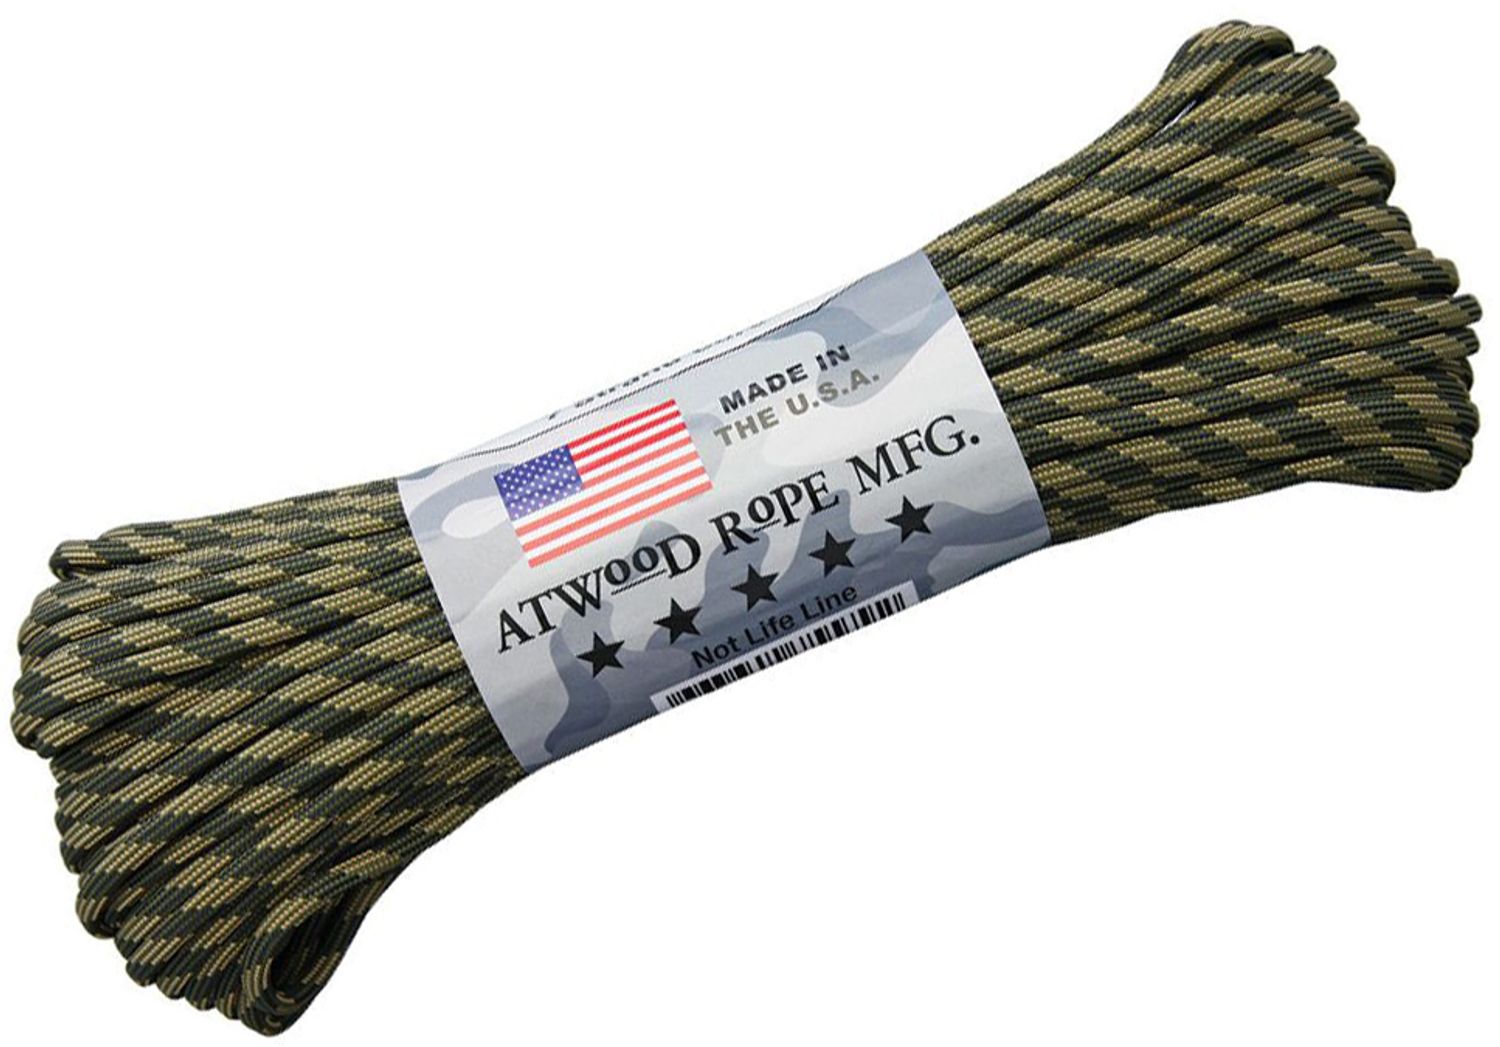 Atwood Rope 550 Paracord, Command, 100 Feet - KnifeCenter - RG1247H